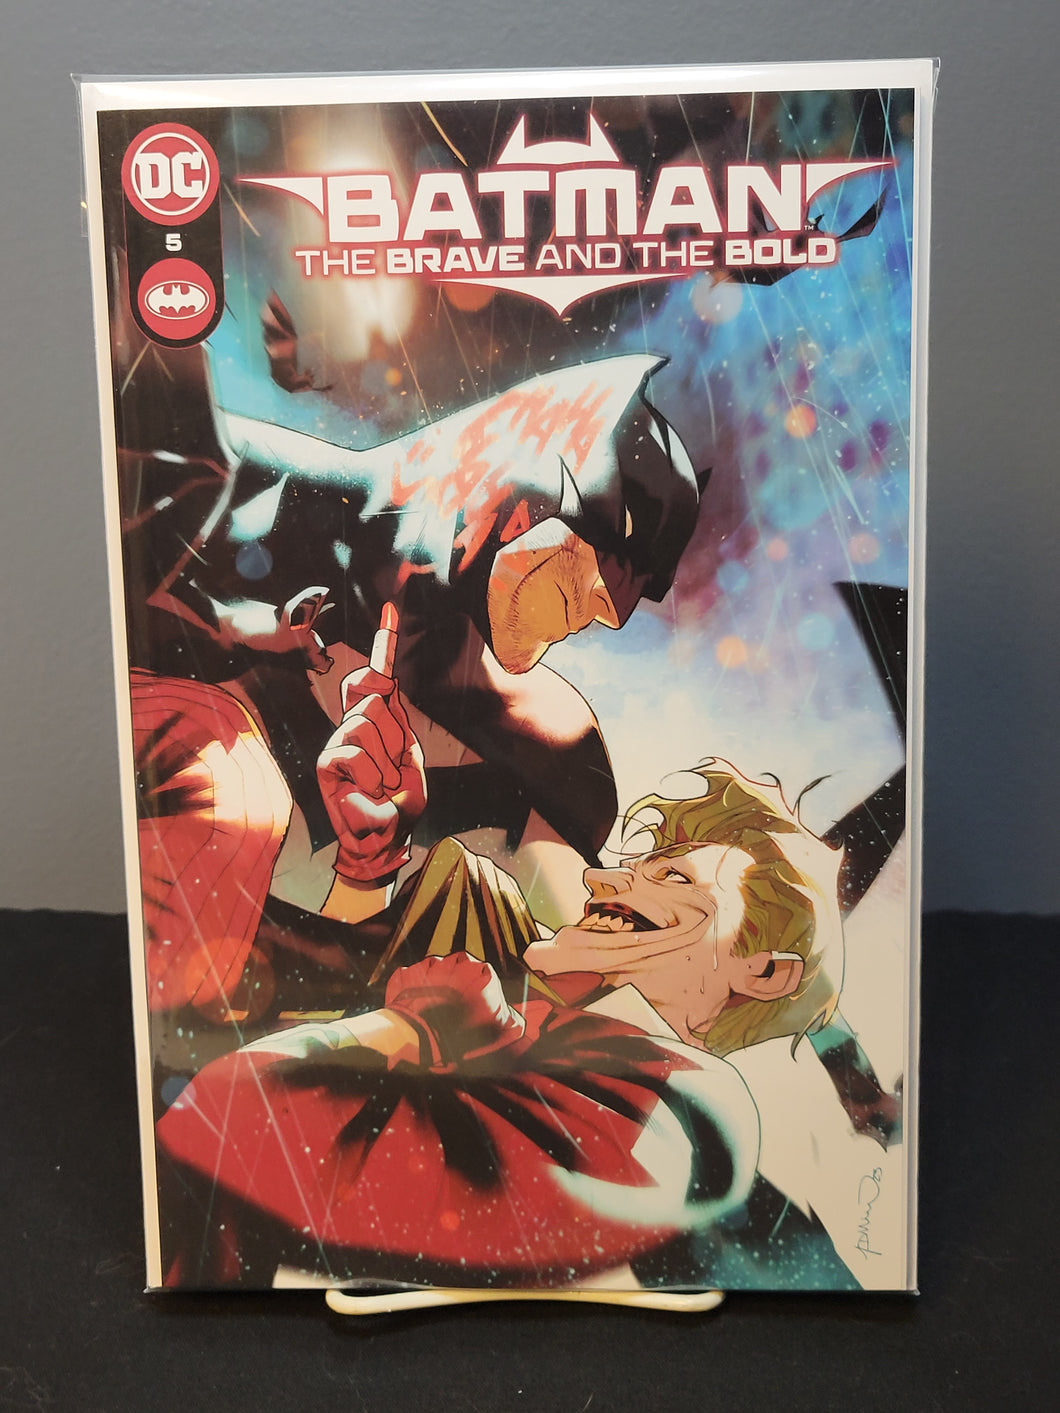 Batman Brave And The Bold #5